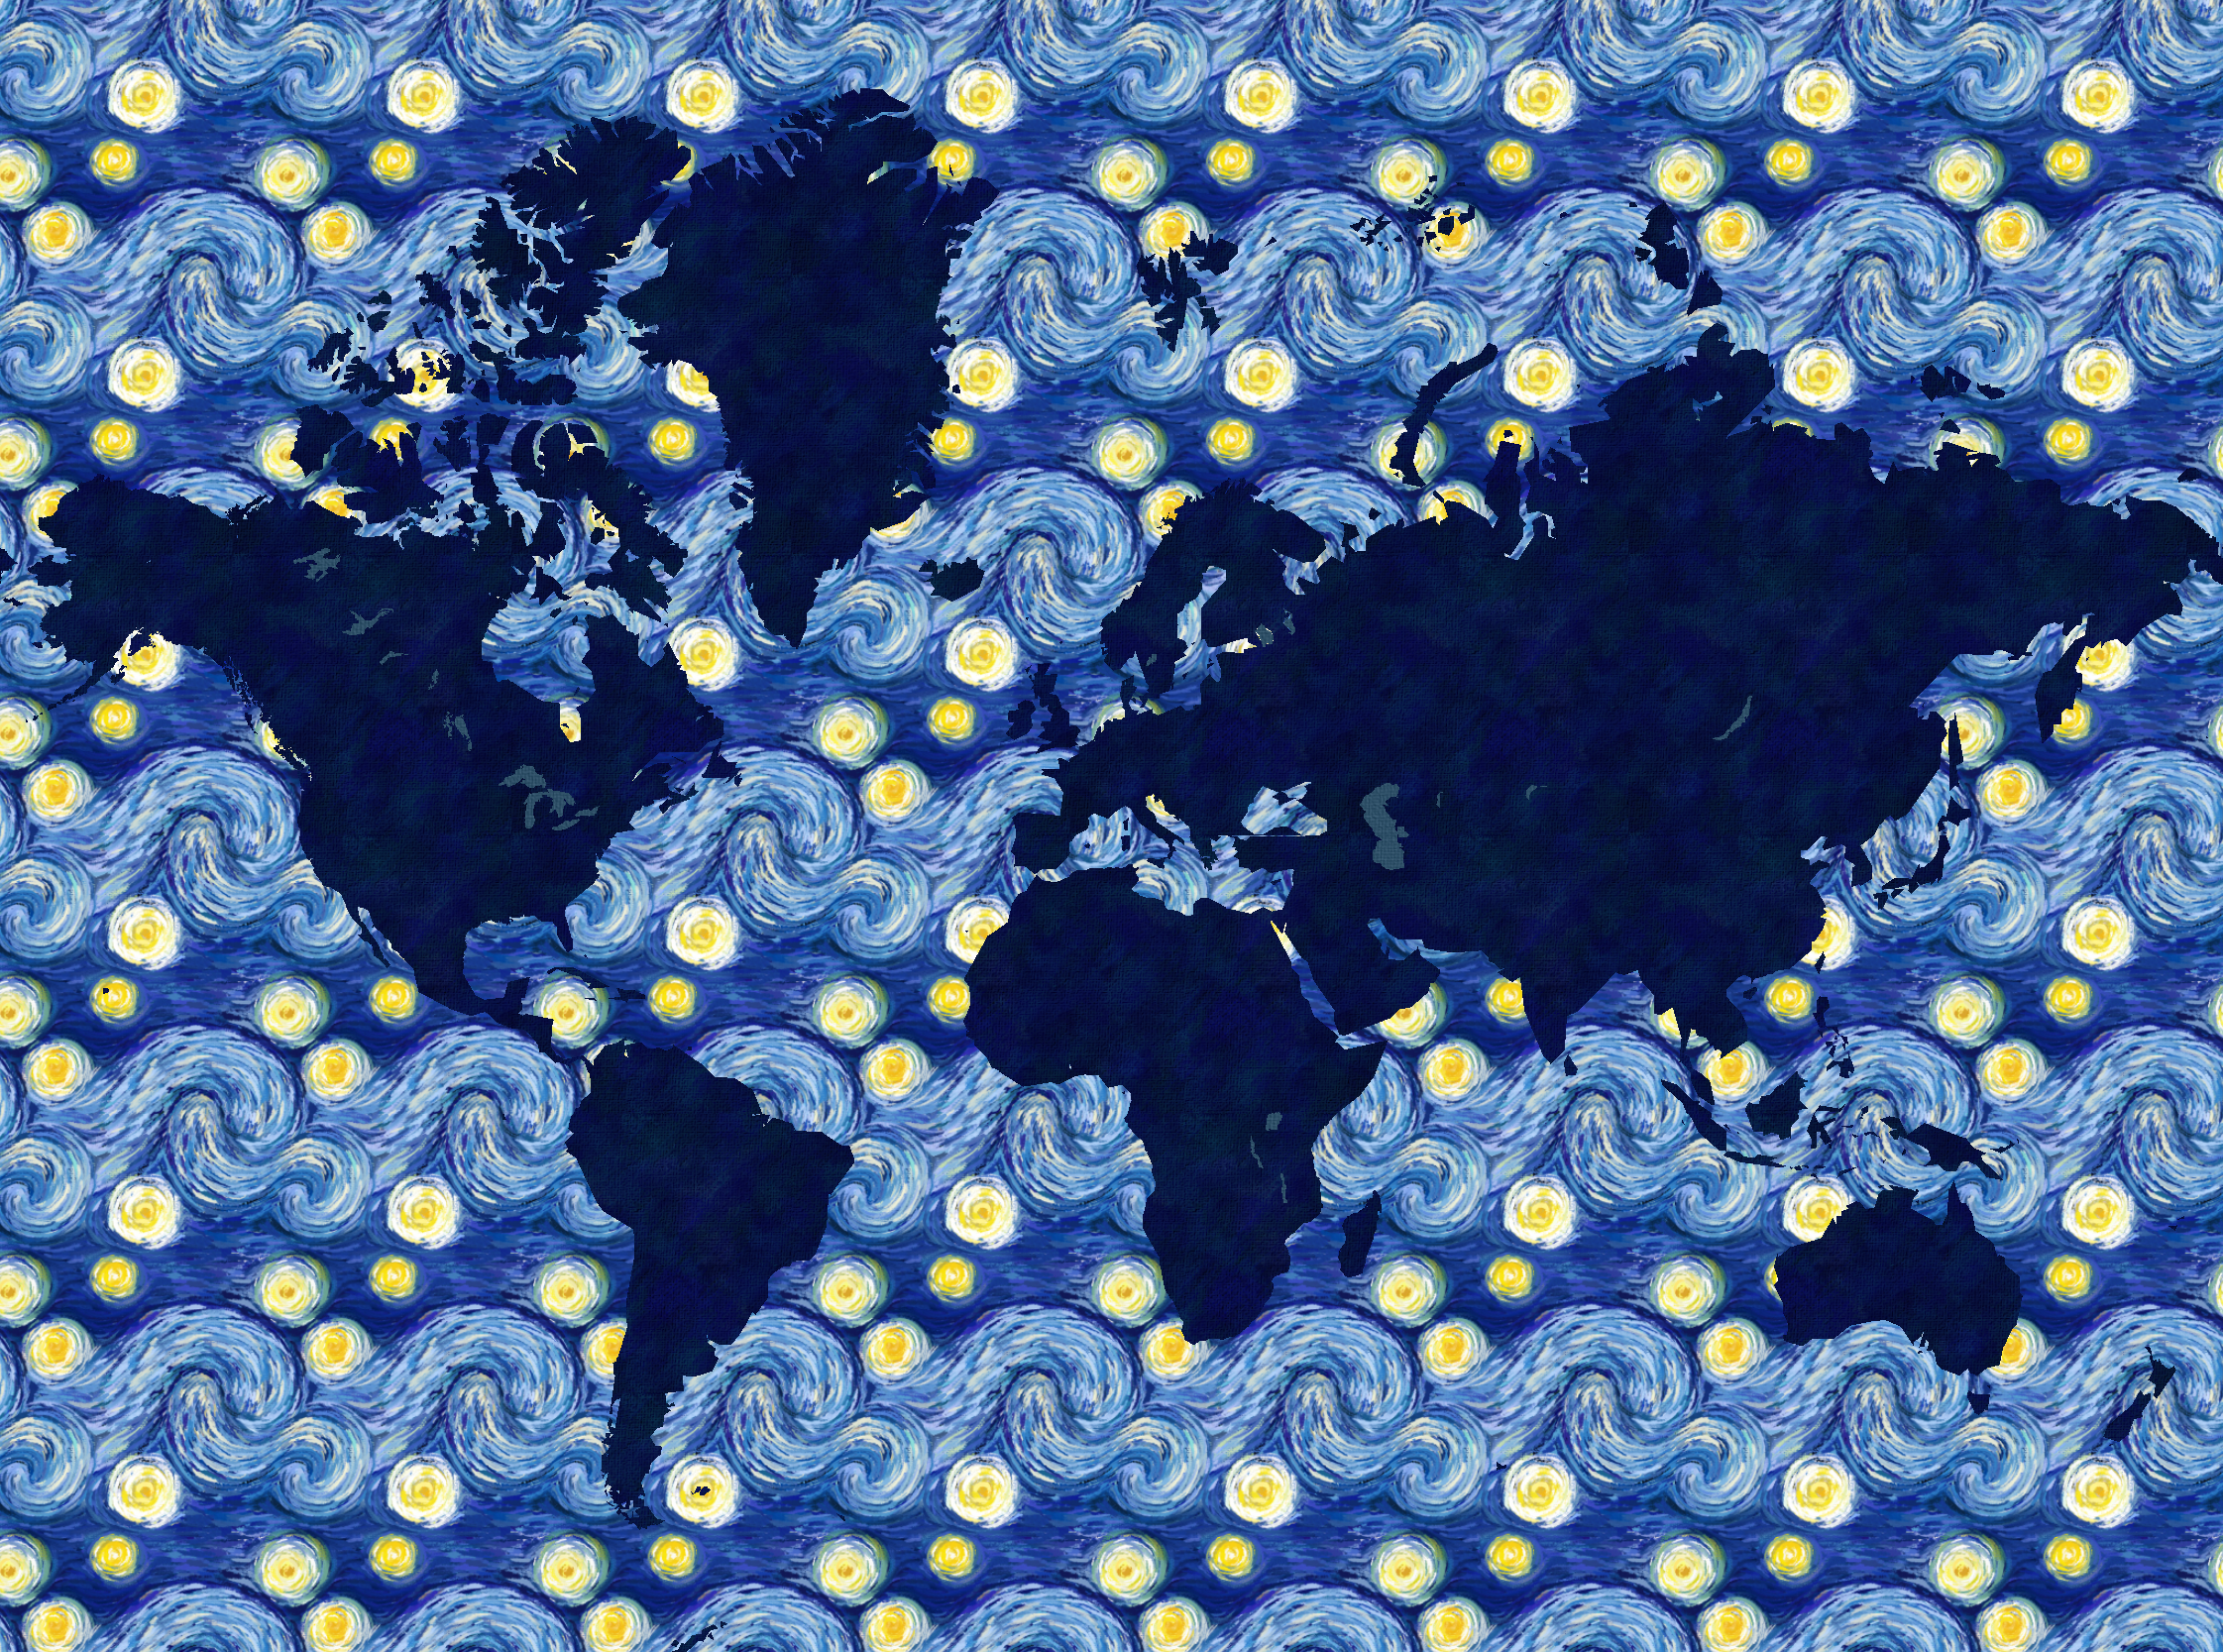 Image of The Starry Night Basemap at a world scale. 